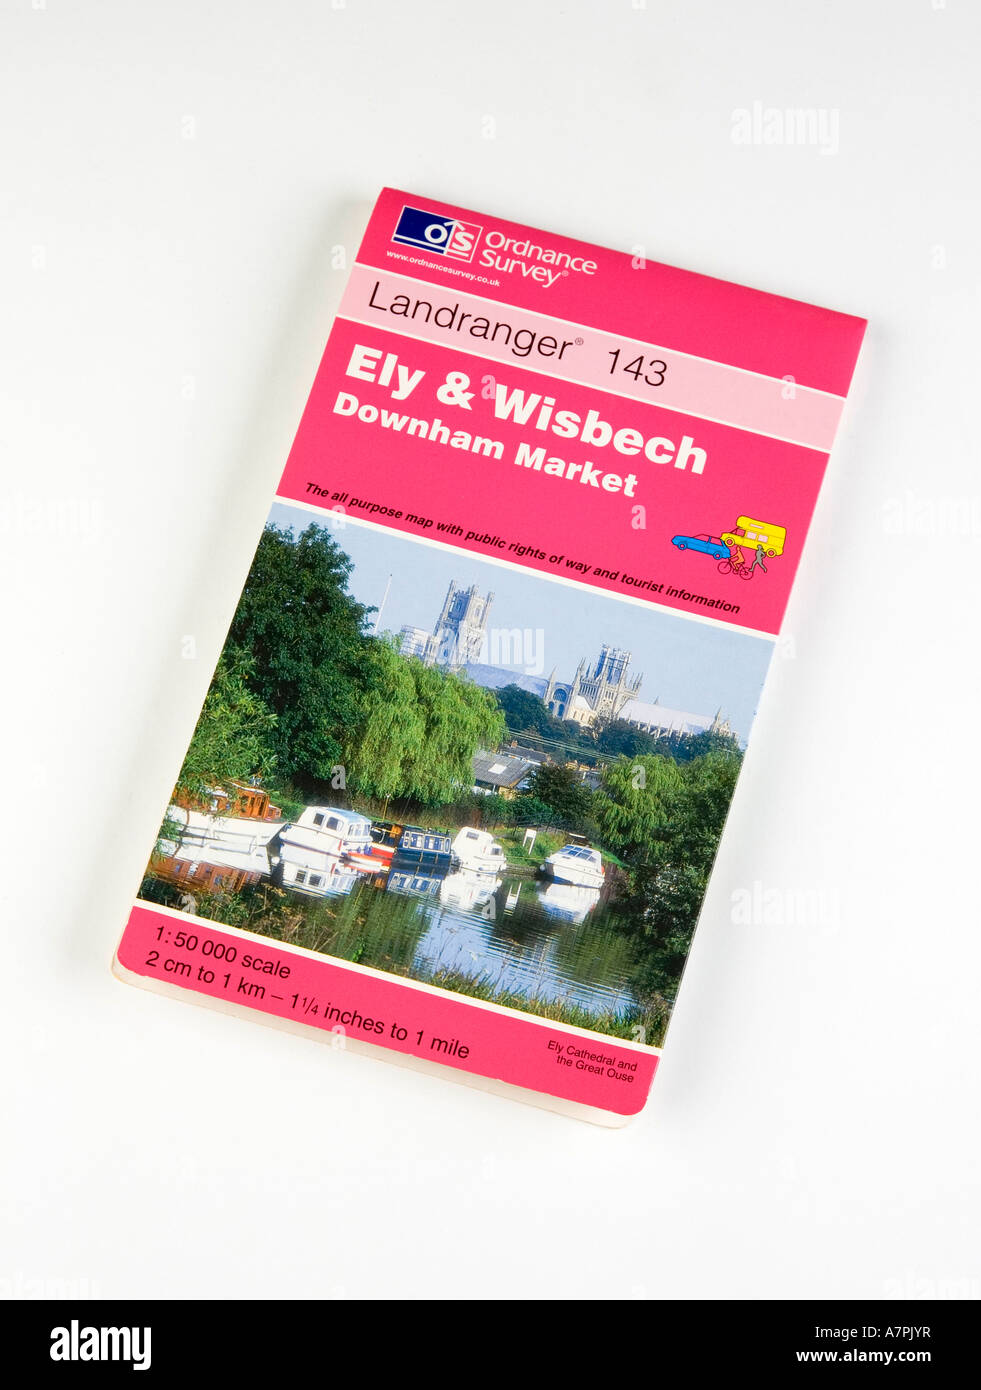 Ordnance Survey map of Ely & Wisbech Stock Photo